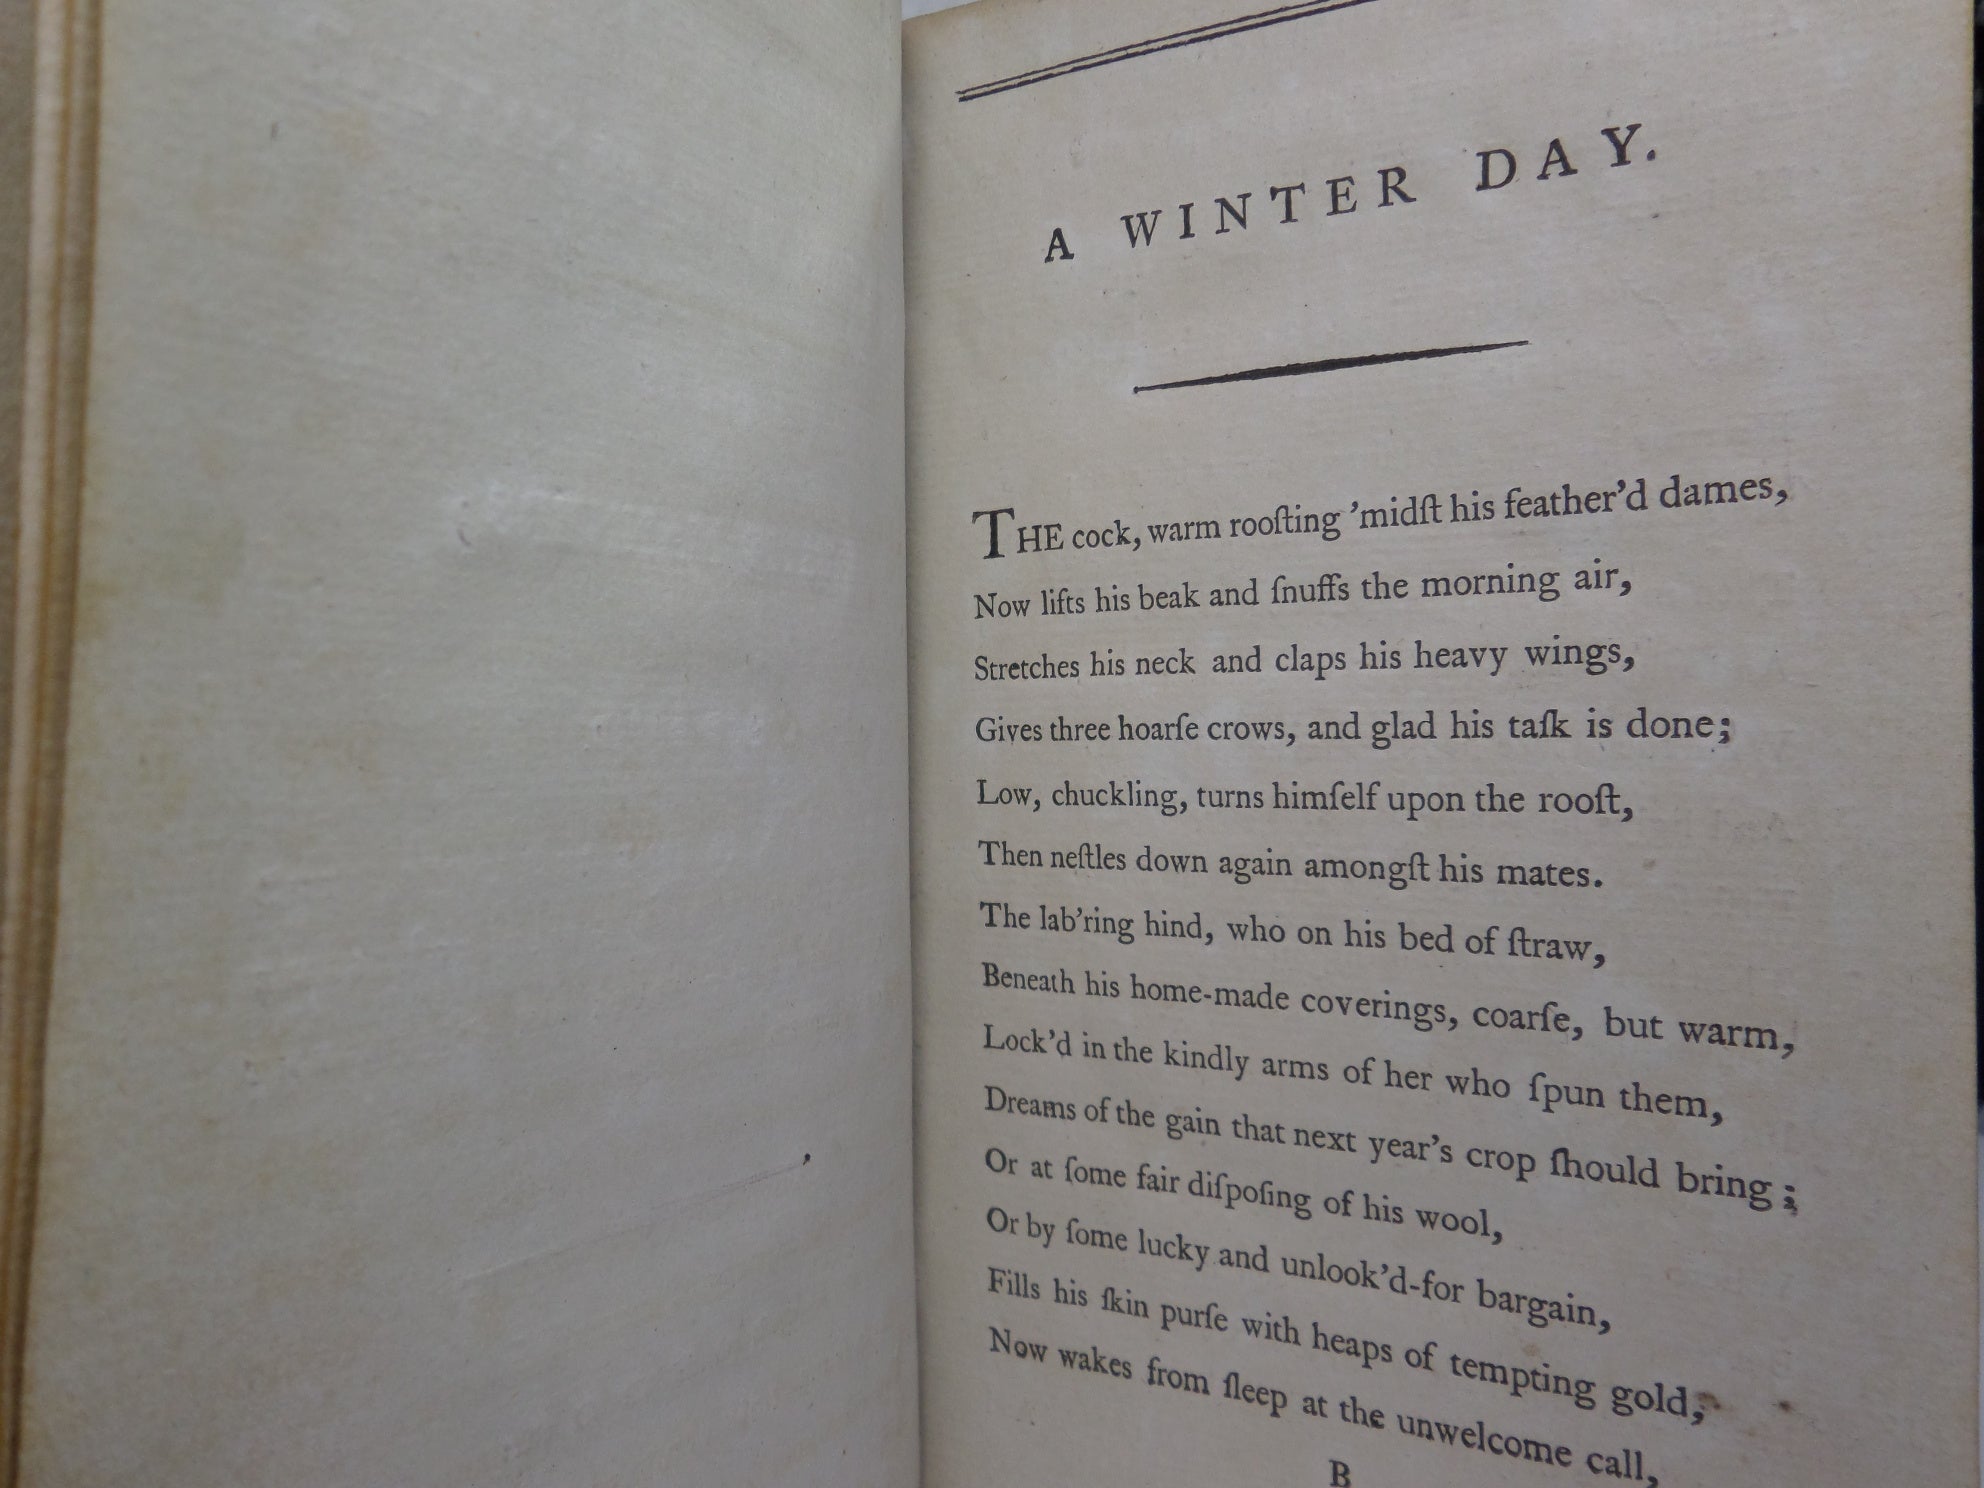 POEMS WHEREIN IT IS ATTEMPTED TO DESCRIBE CERTAIN VIEWS OF NATURE 1790 JOANNA BAILLIE